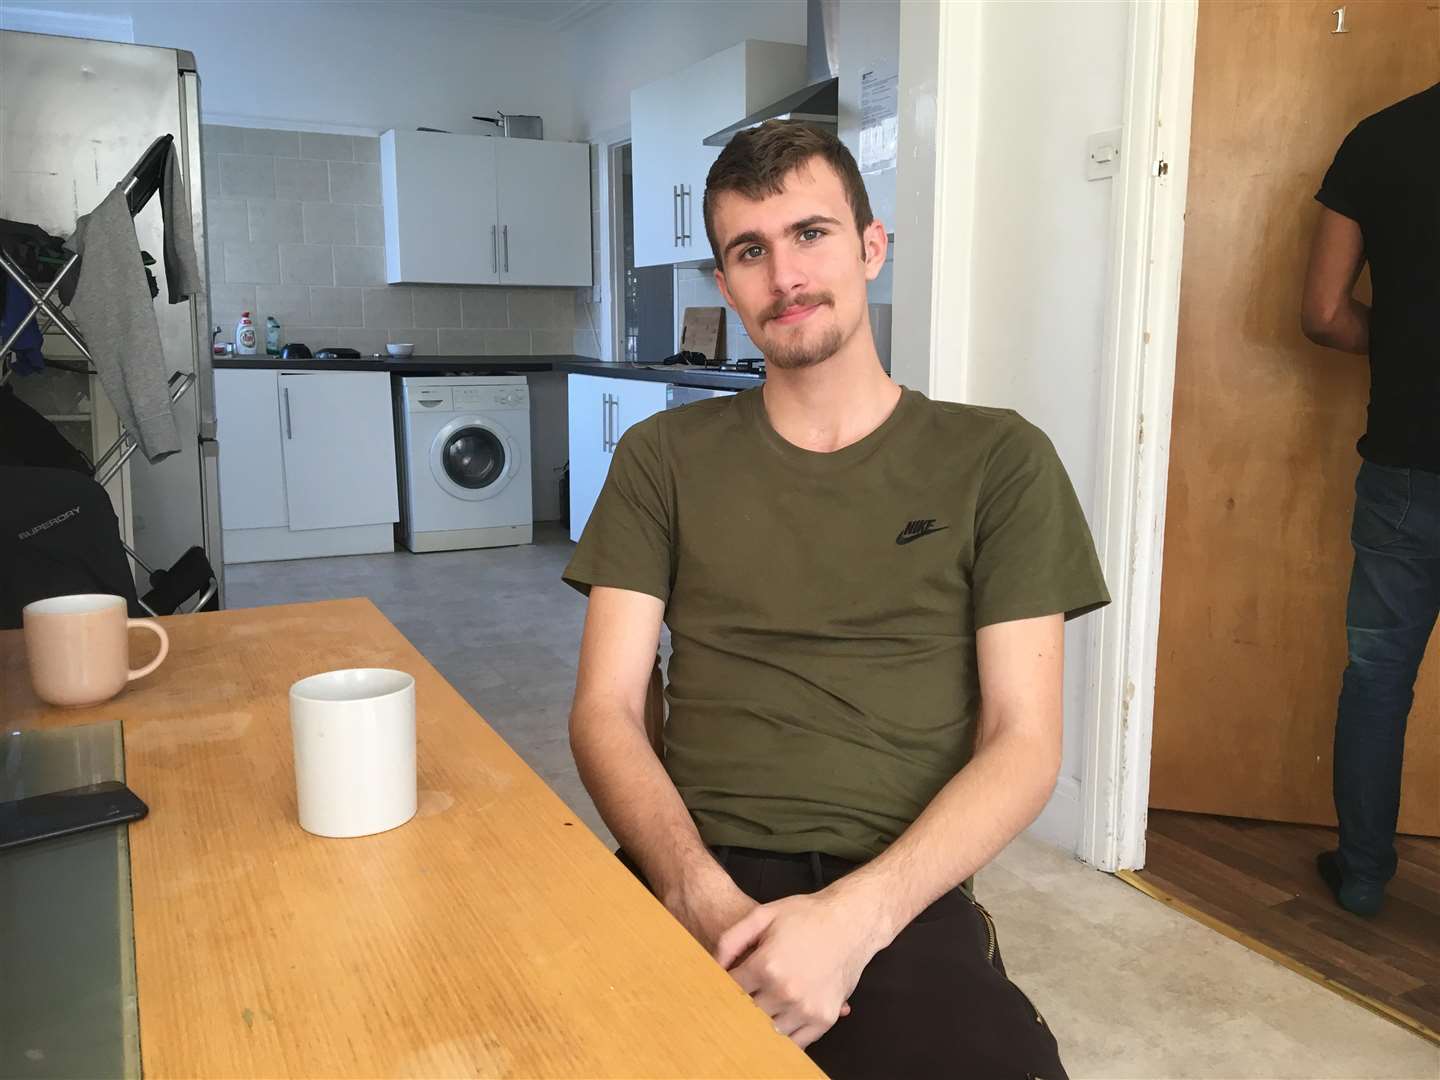 Alfie Mitchell, 18, moved to the house a month ago